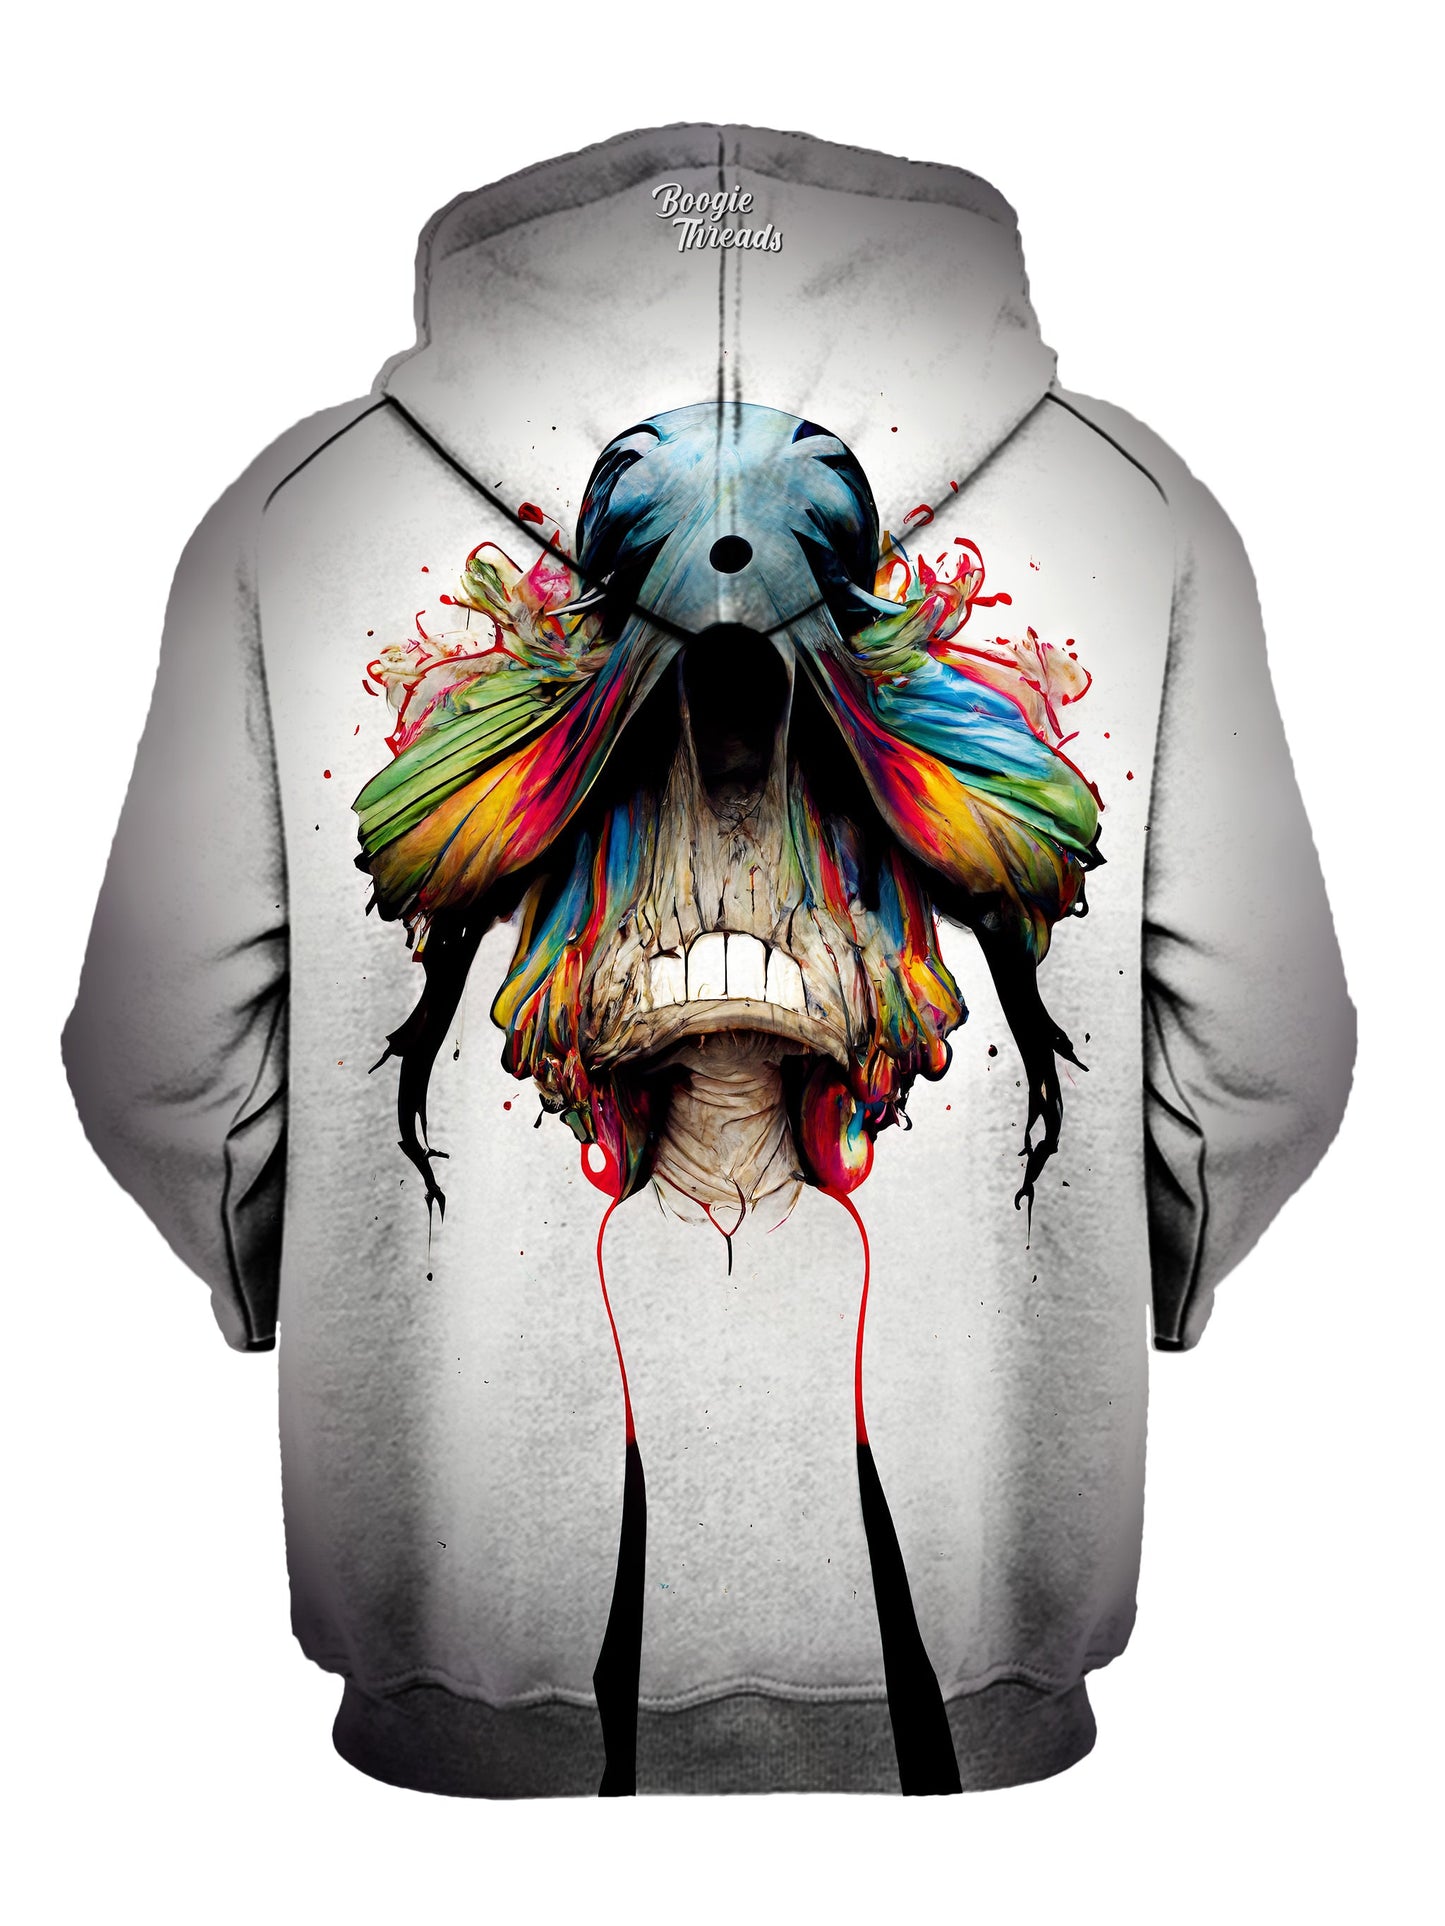 Awoken Reflection Unisex Pullover Hoodie - EDM Festival Clothing - Boogie Threads